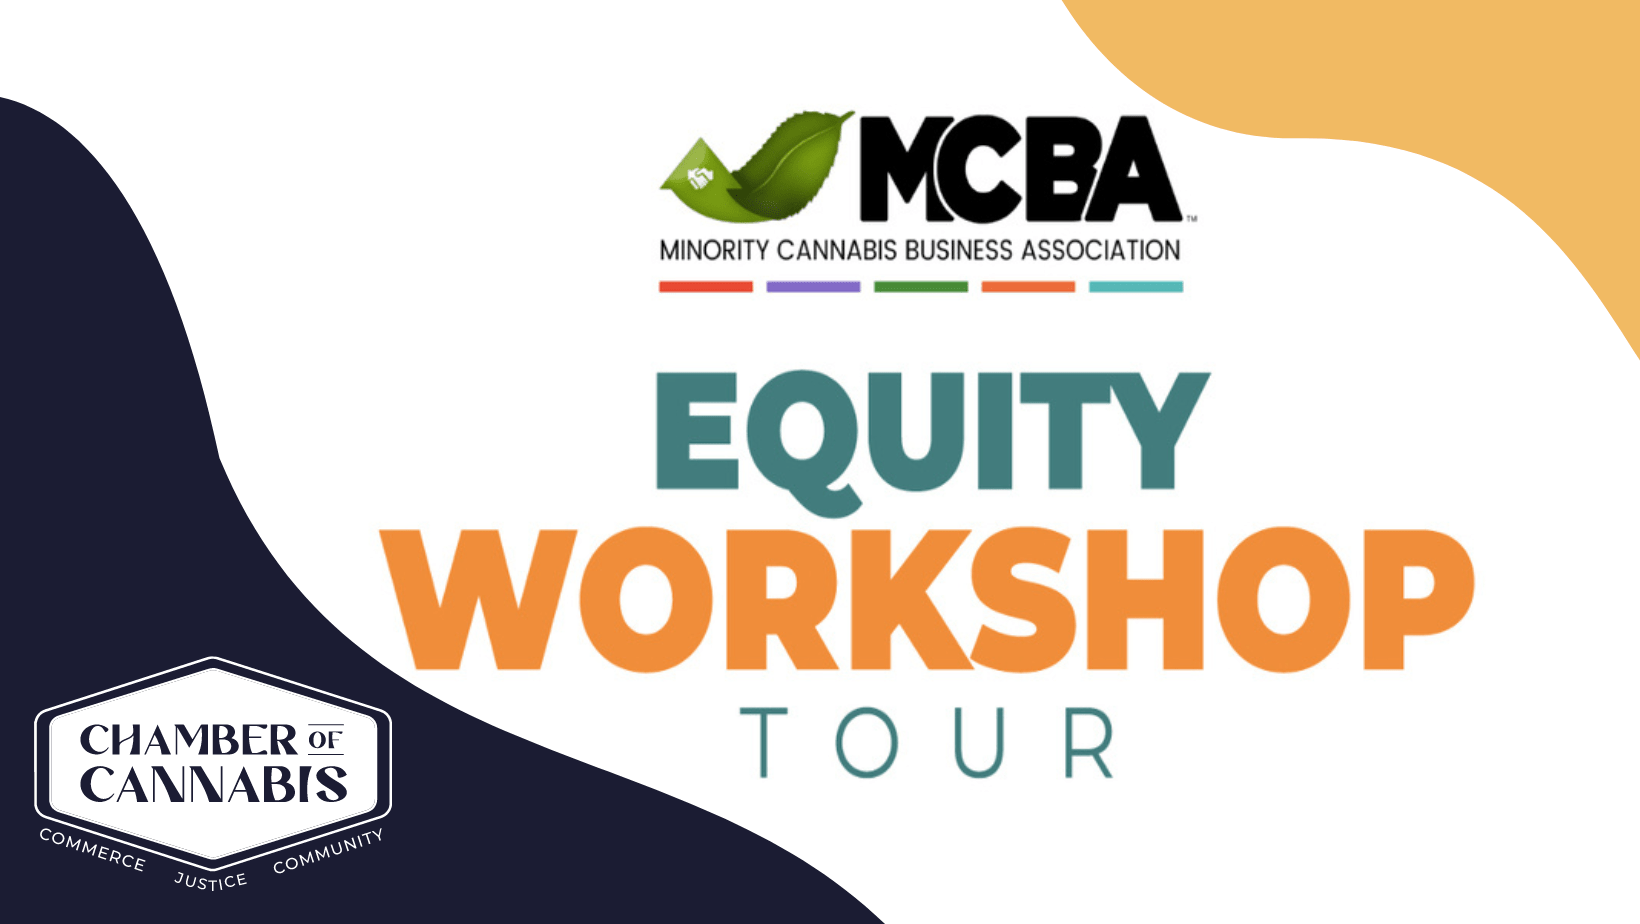 Chamber Joins MCBA Equity Worshop